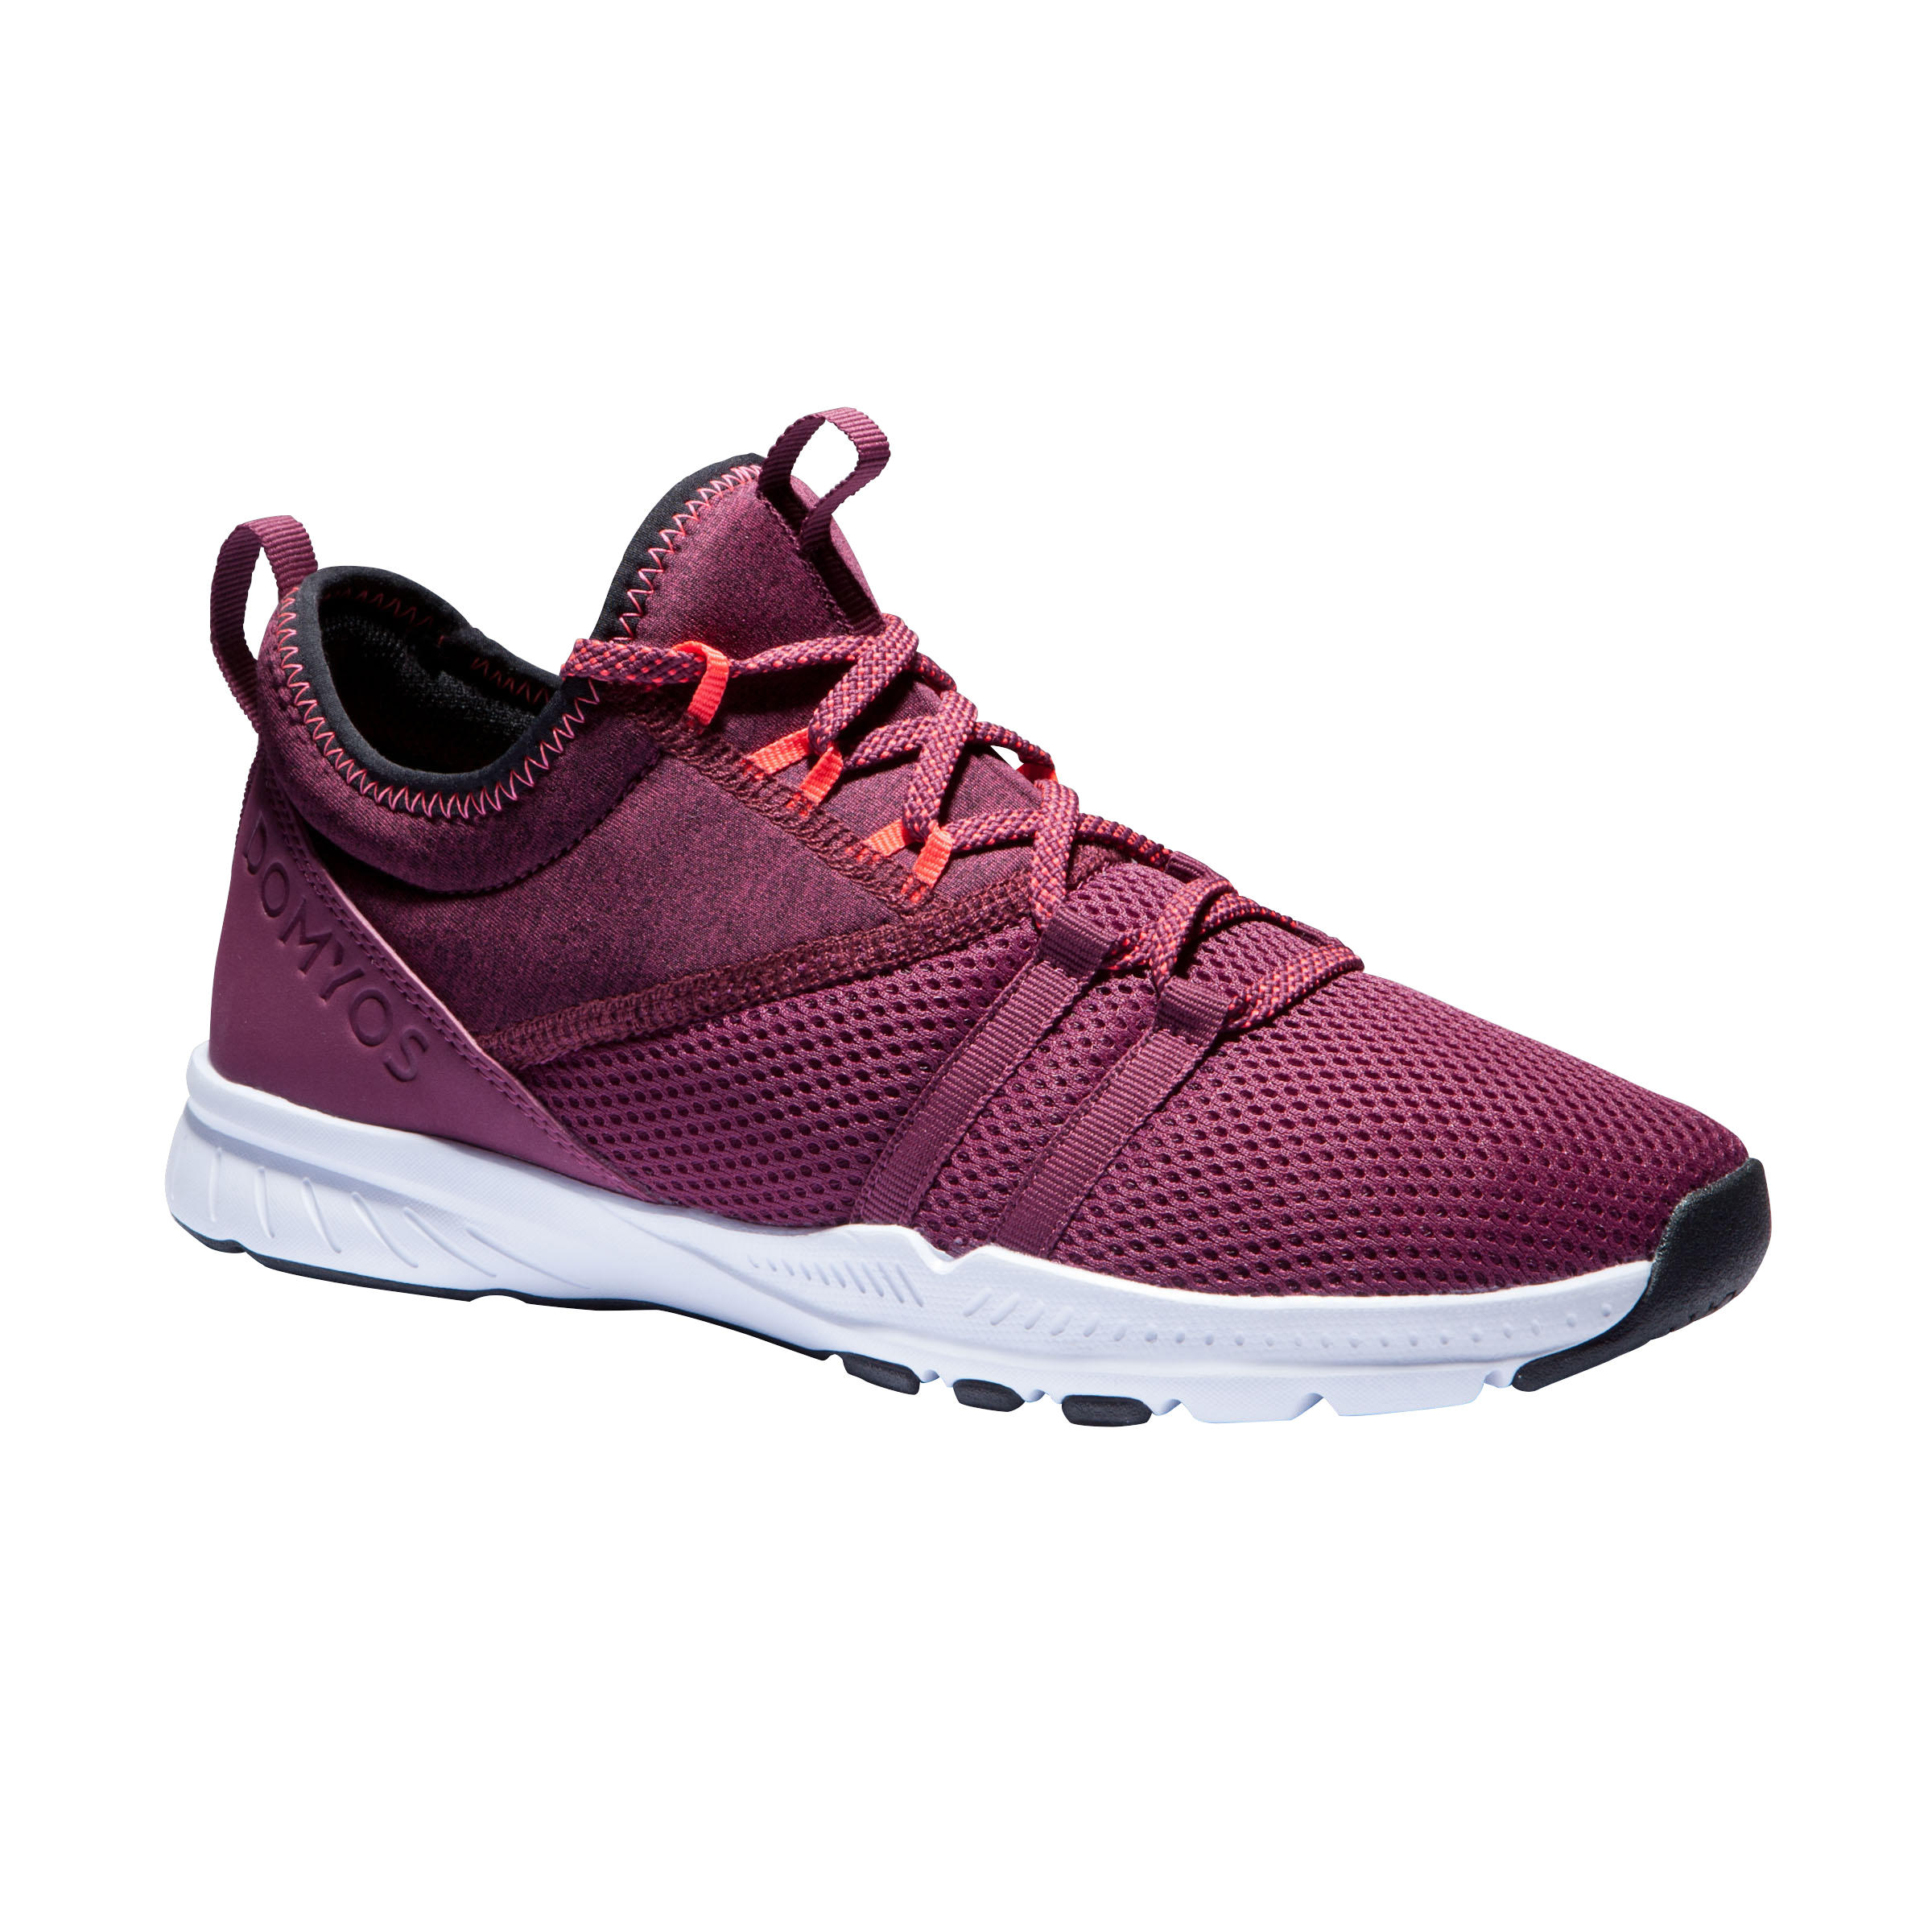 Women's Fitness Shoes 120 Mid - Burgundy 1/16